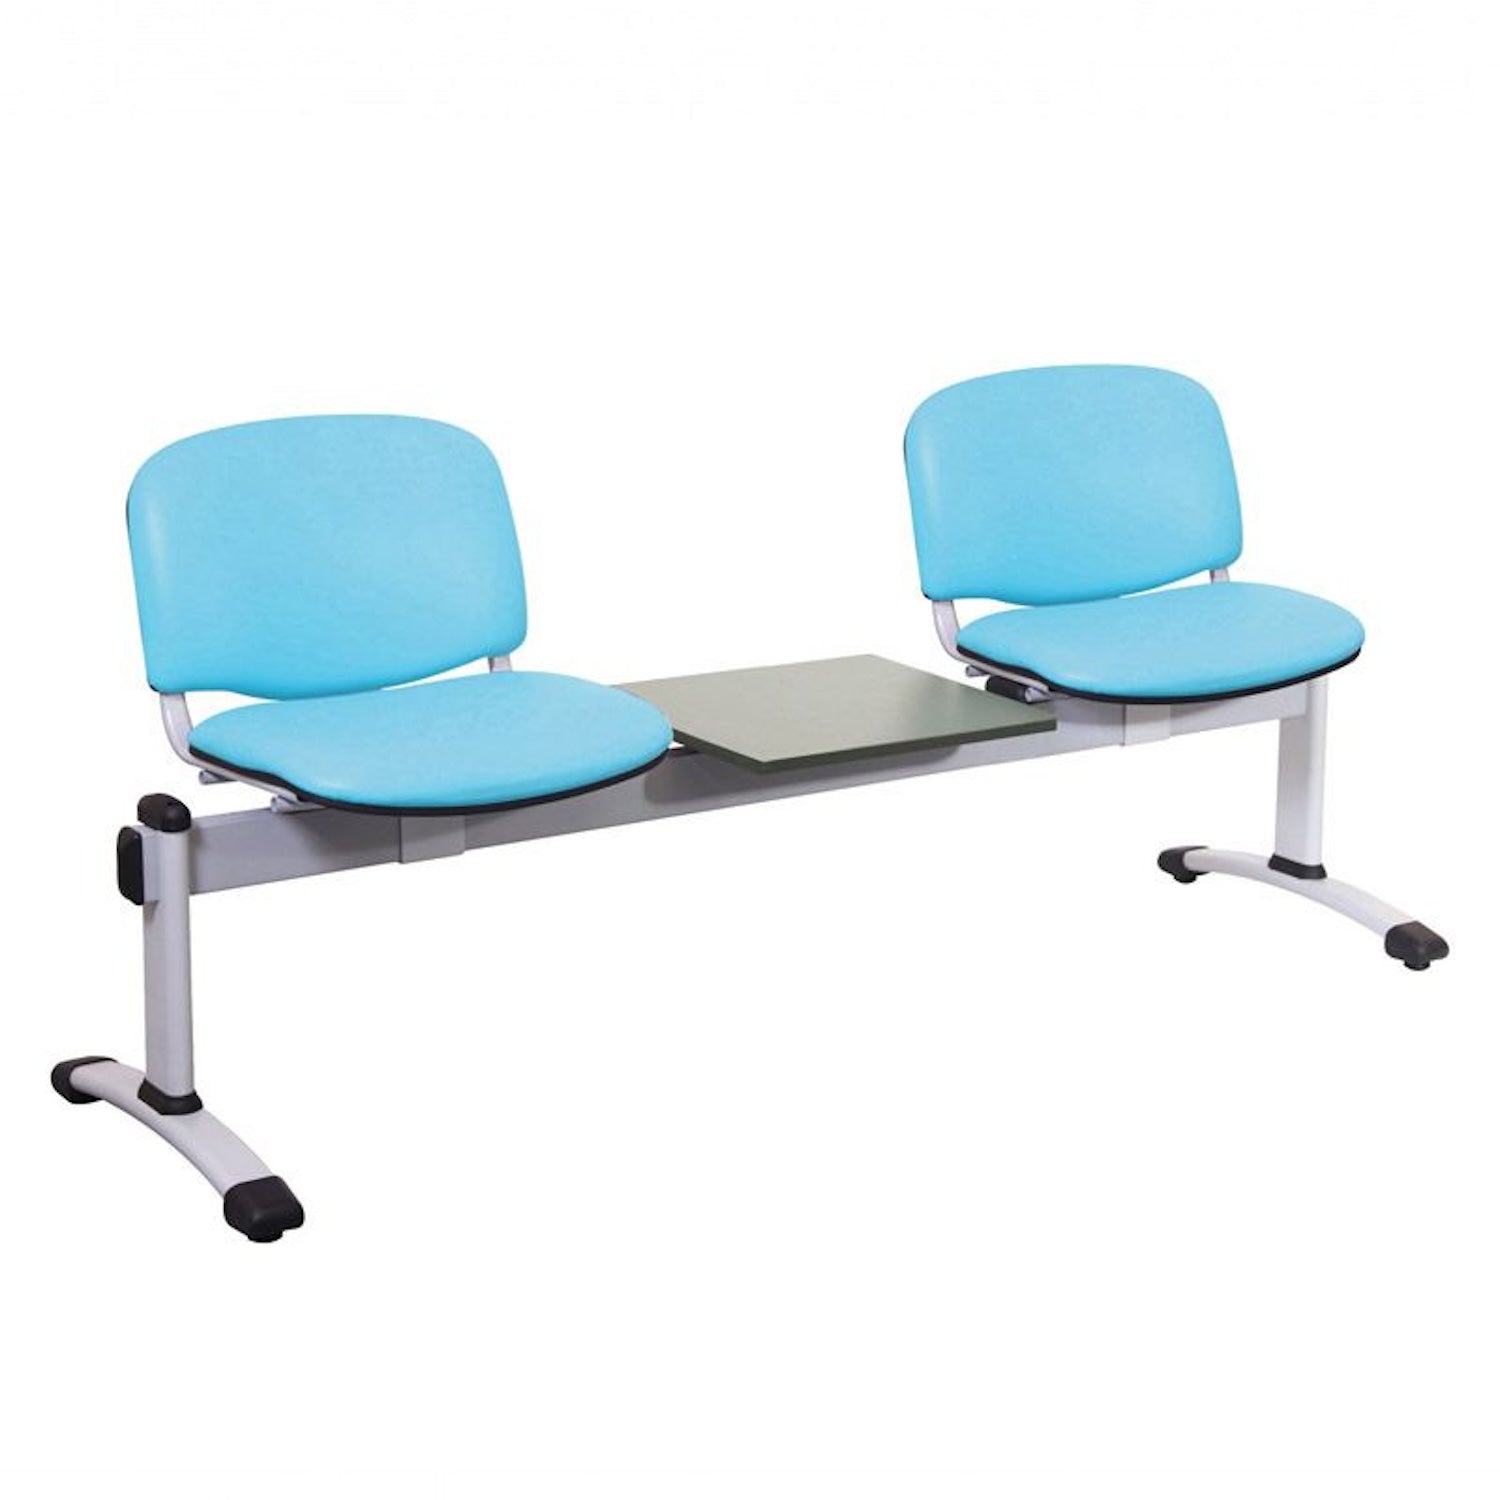 Sunflower Visitor 2 Anti-bacterial Vinyl Upholstery Seats & 1 Table Module in Sky Blue